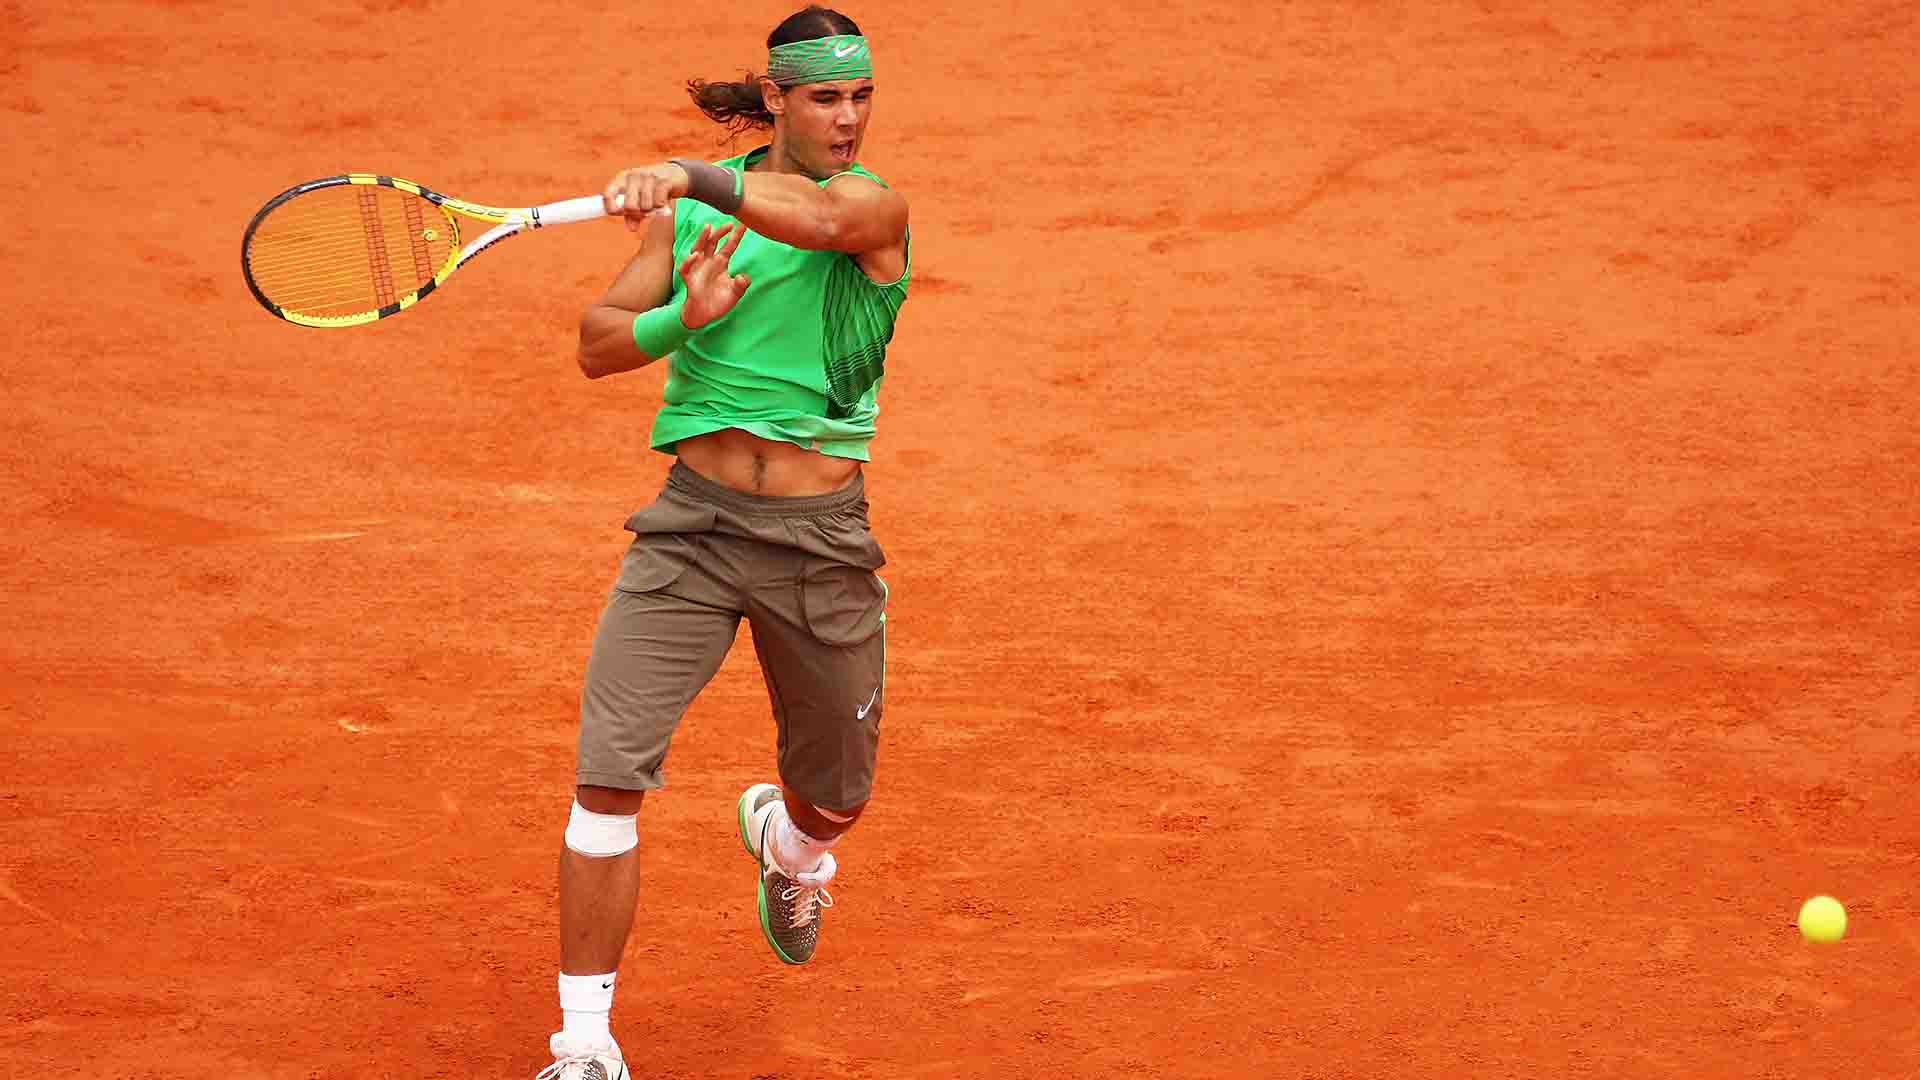 Rafael Nadal races past Roger Federer 6-1, 6-3, 6-0 to win Roland Garros without dropping a set for the first time.